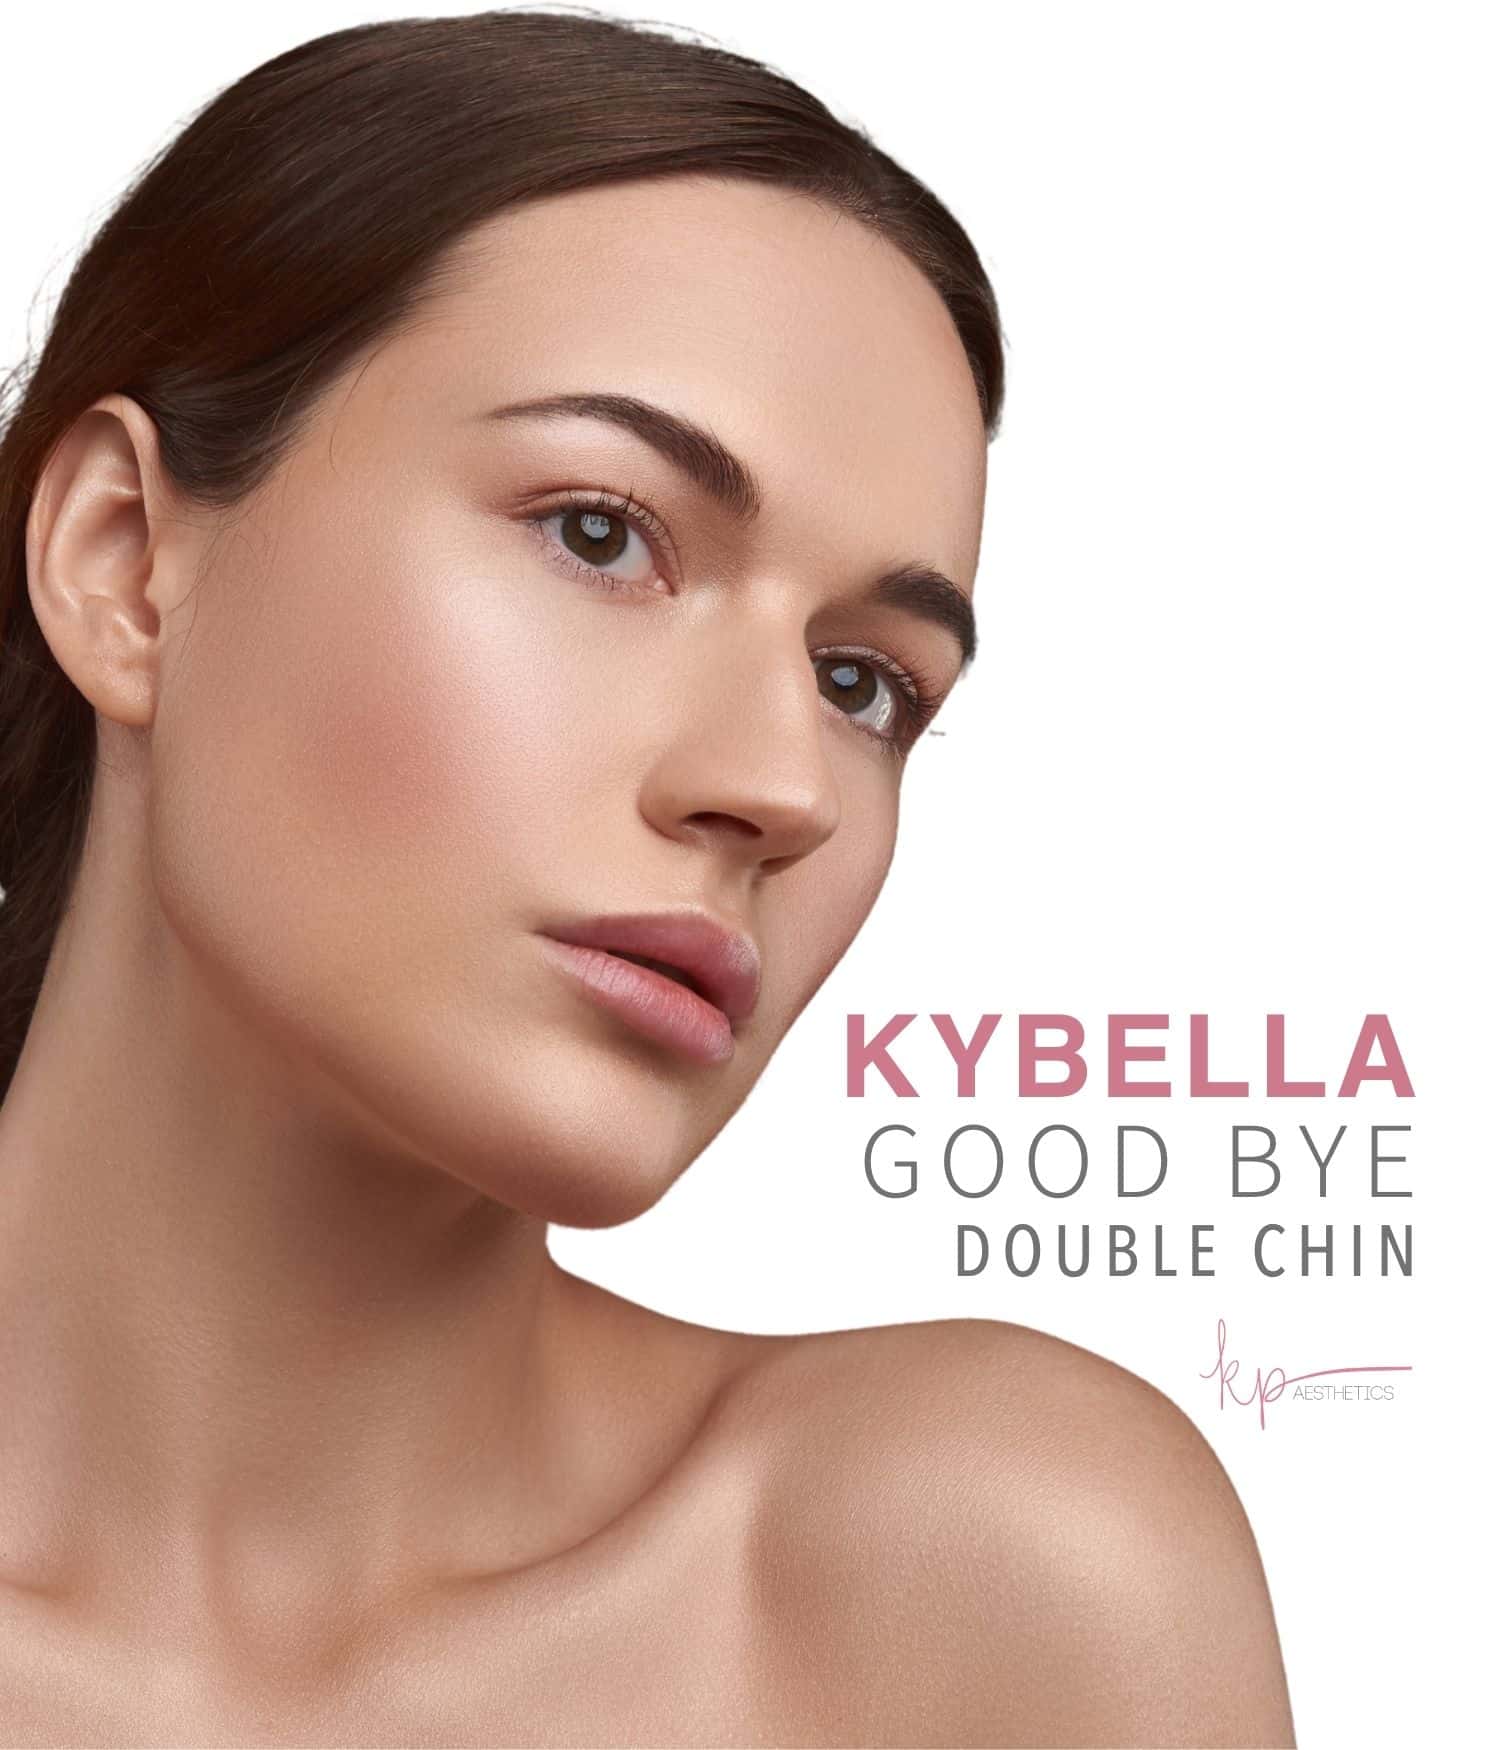 Woman after kybella treatment for double chin at kp aesthetics.